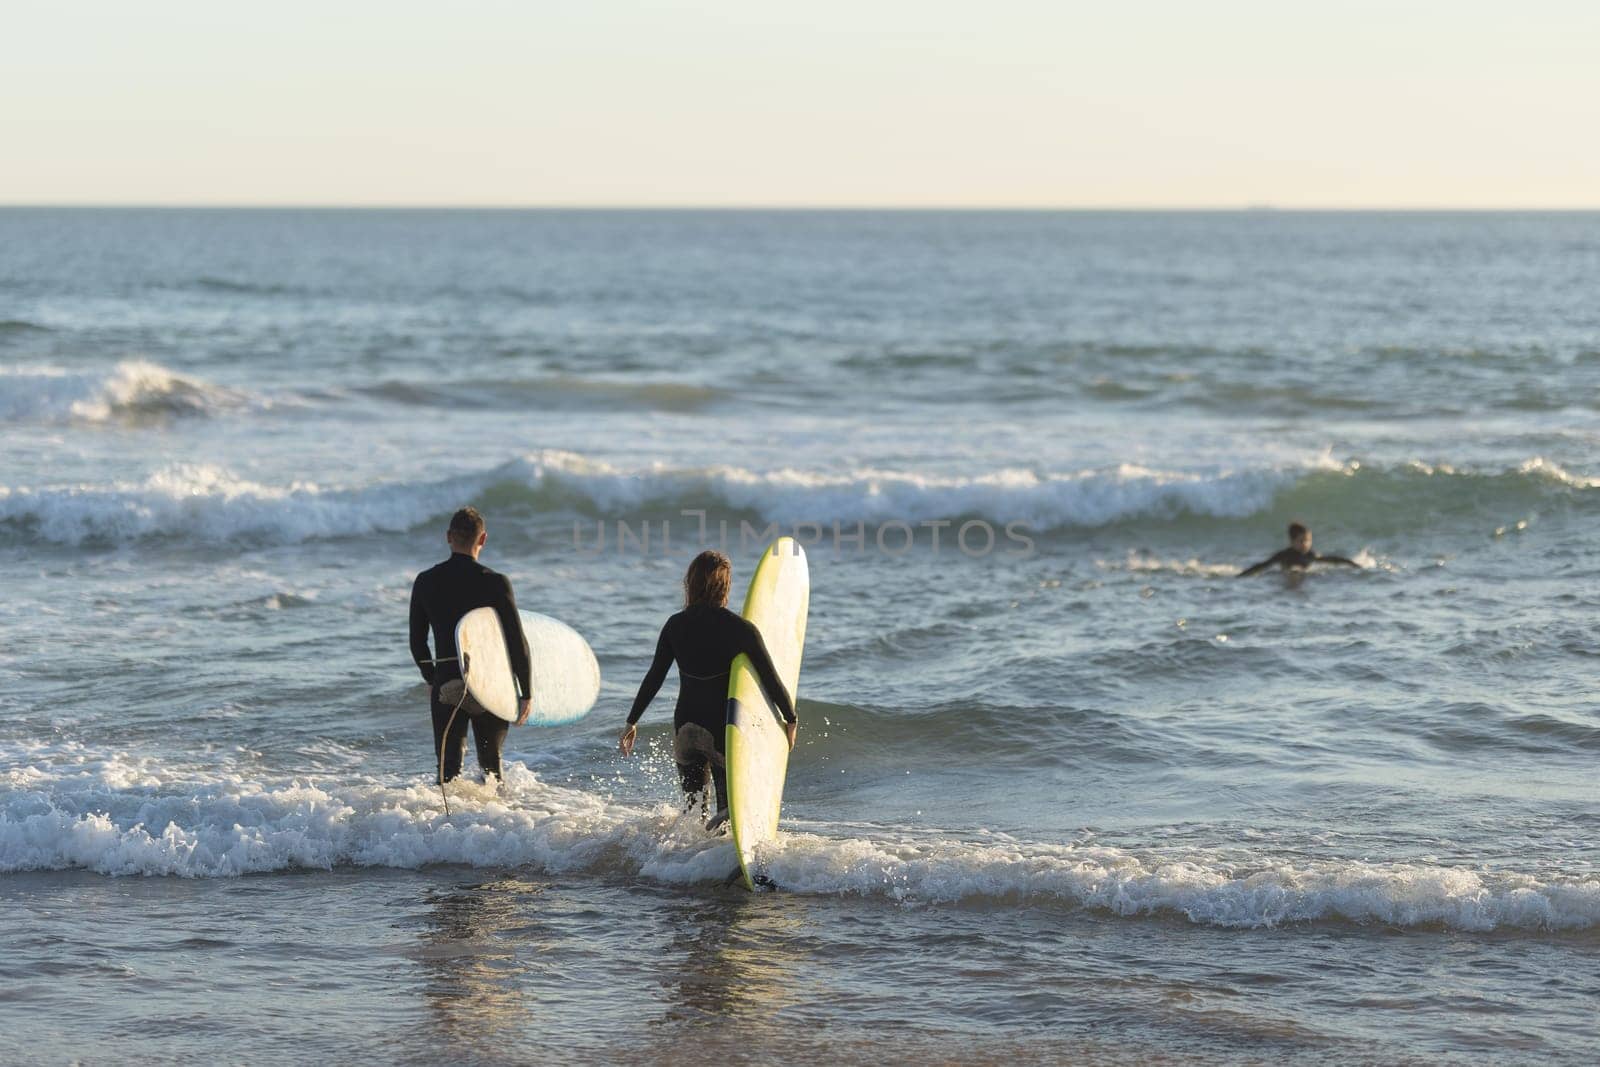 A man and a woman go out to sea holding surfboards. Mid shot